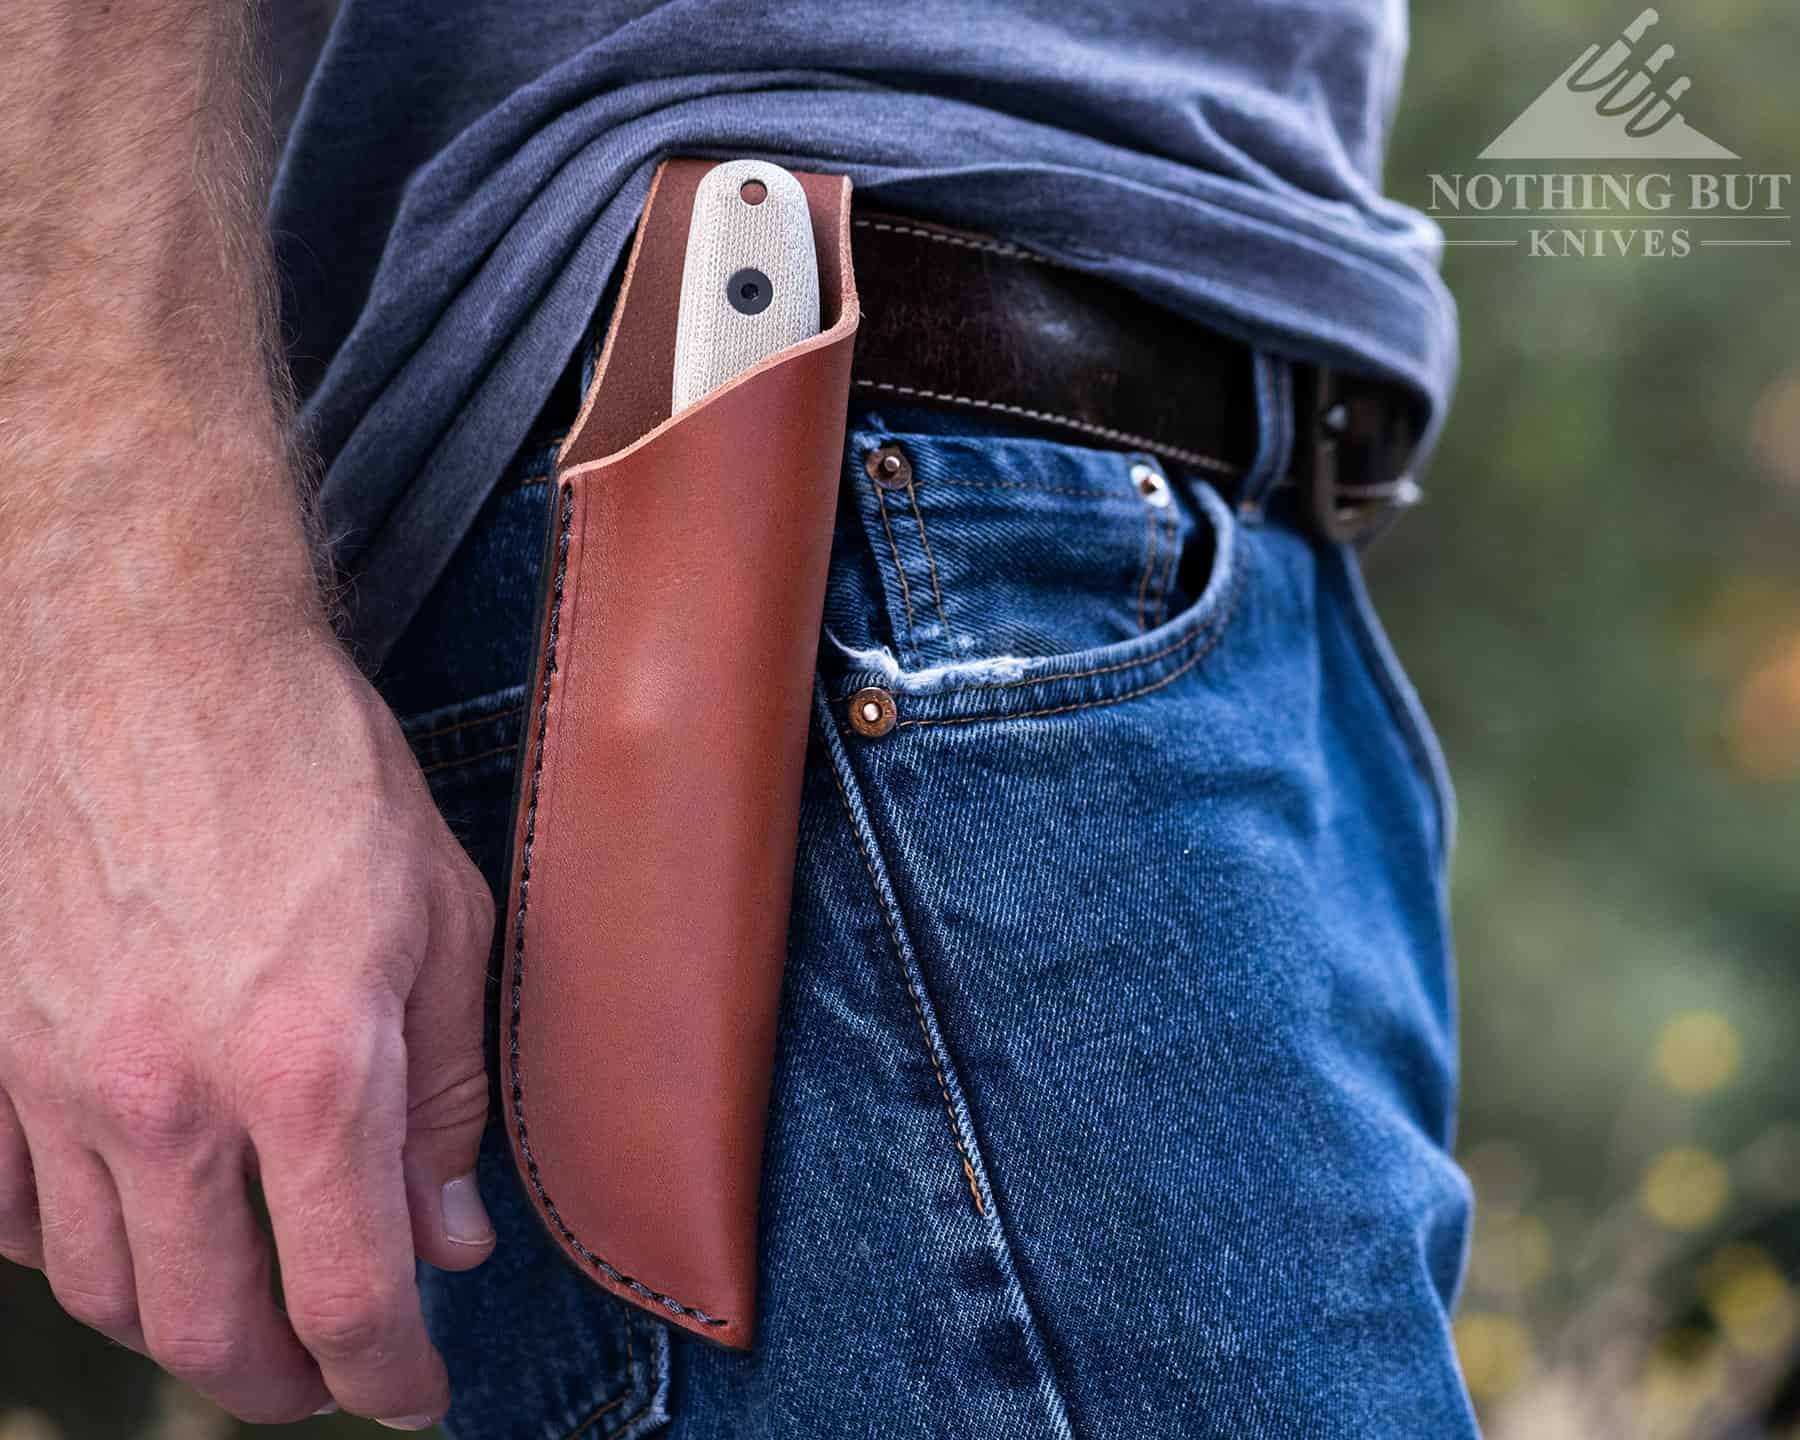 The Esee RB3 leather sheath is a classic bushcraft style sheath that holds the knife snugly. 